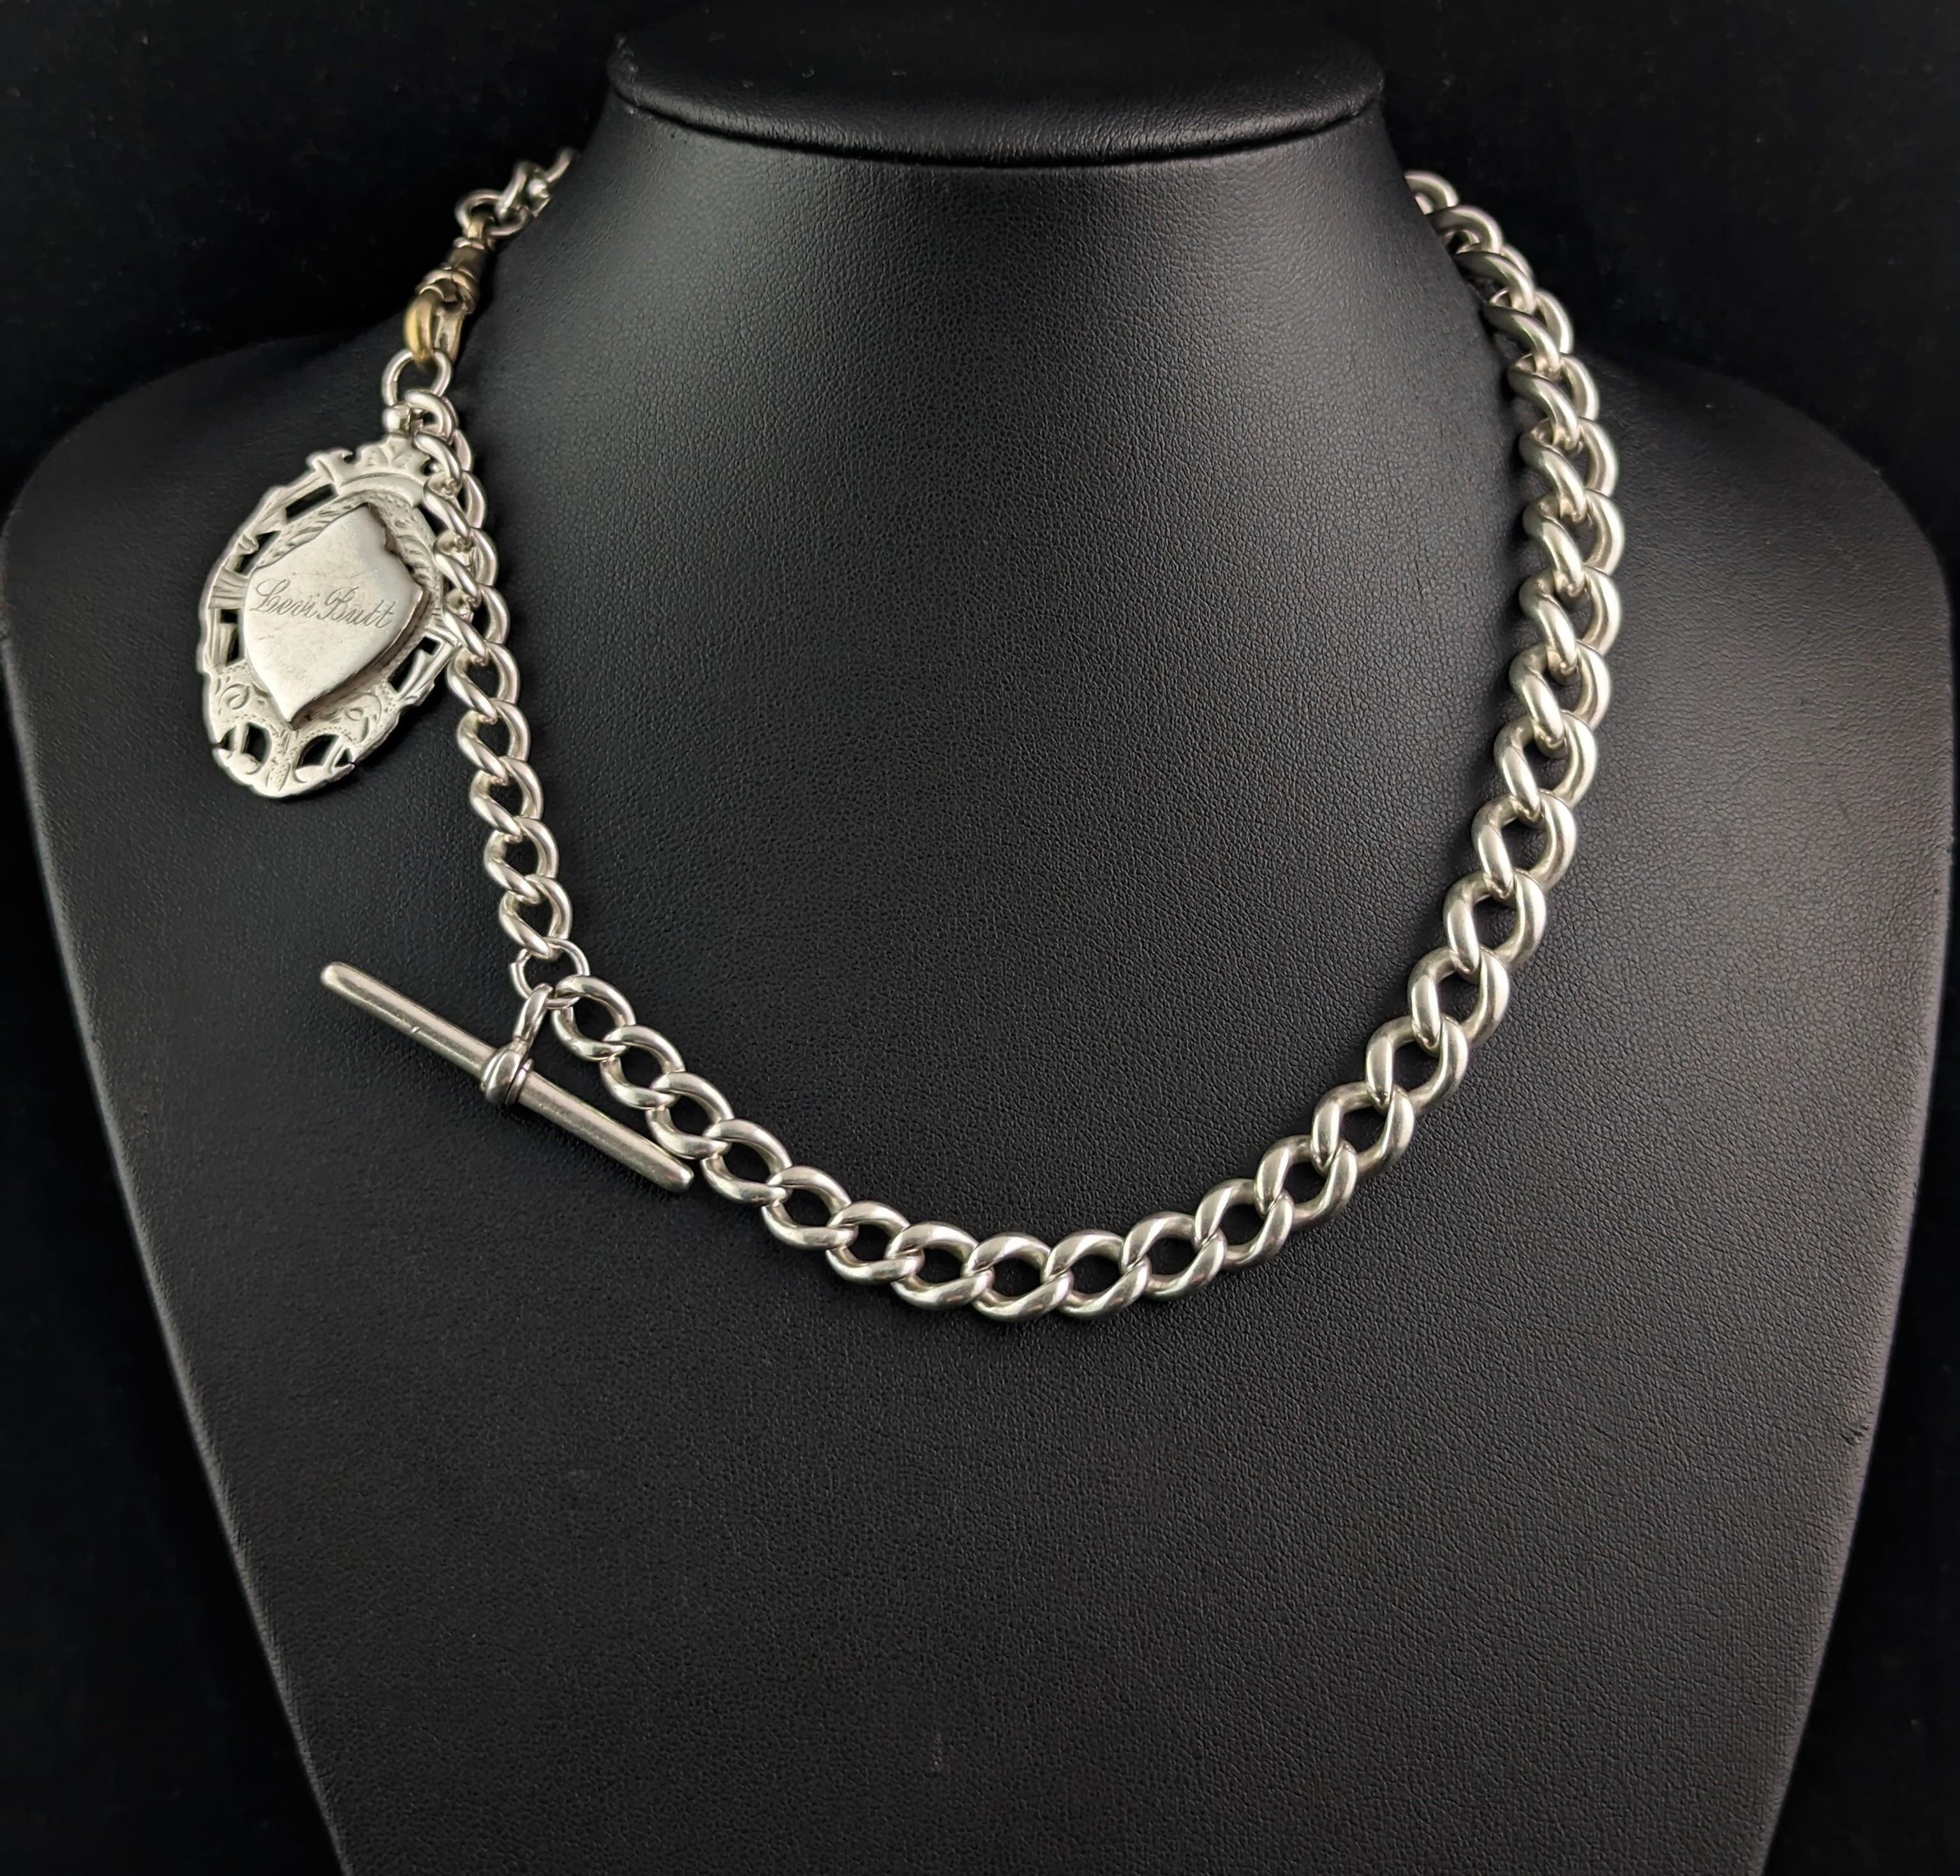 You can't help but fall in love with this handsome antique Albert chain.

It is a dream of an Albert chain with big chunky links, a good long length and a heavy feel and weight.

A wonderfully chunky curb link Albert chain in crisp, cool sterling